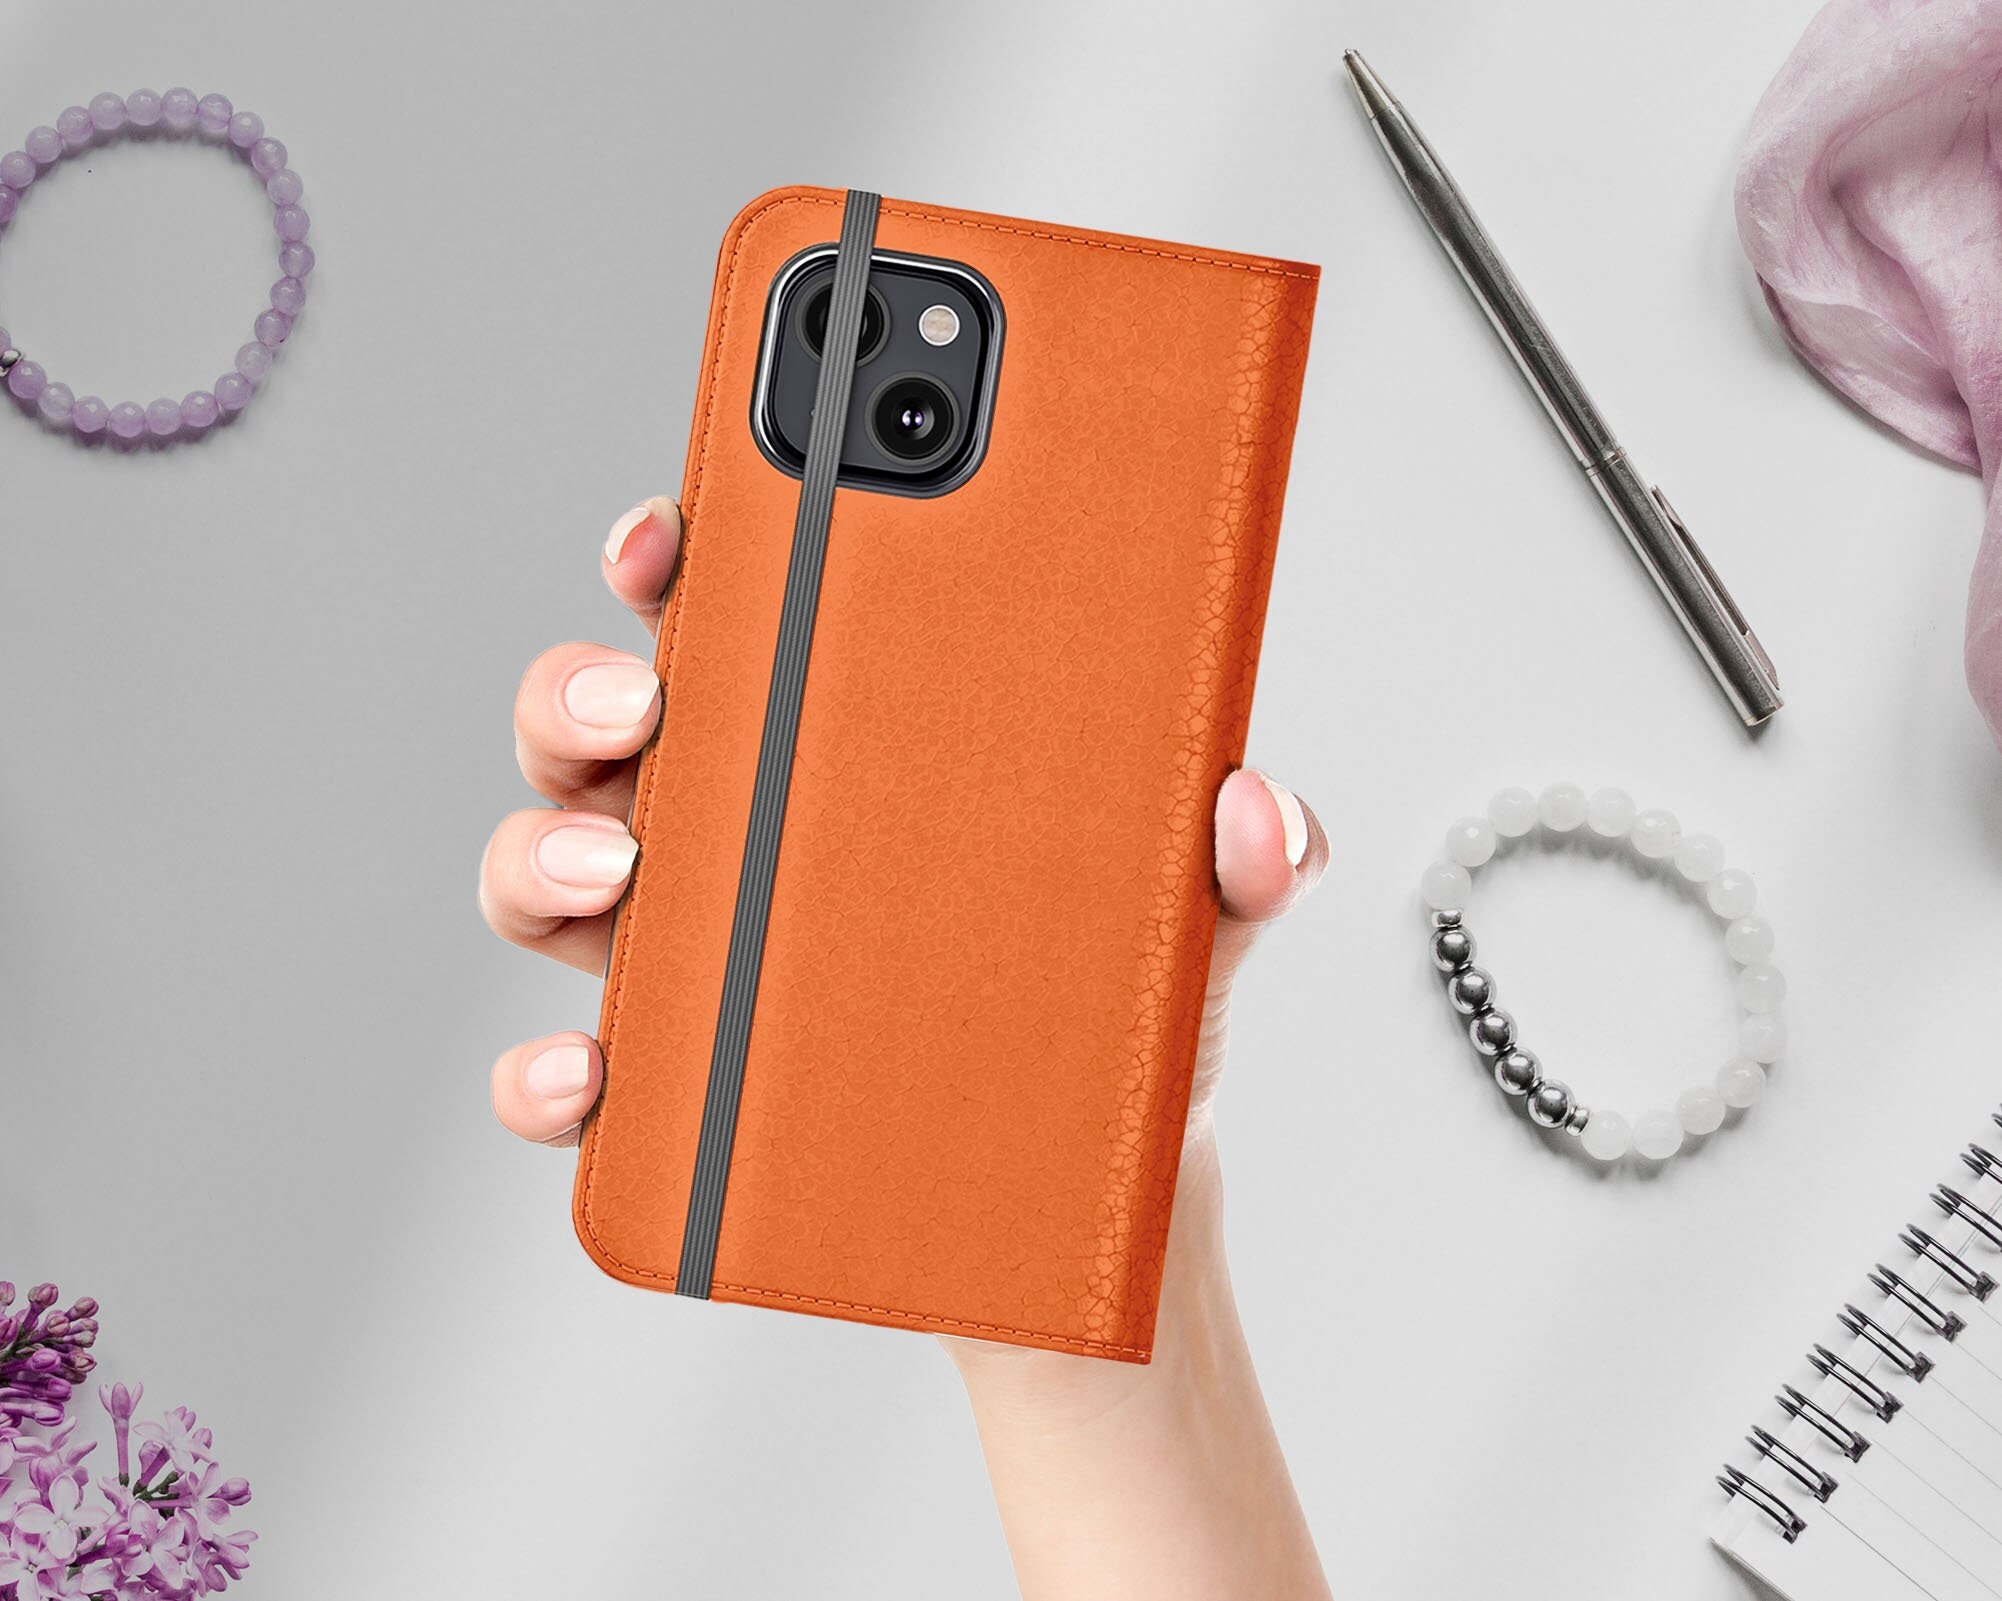 4-IN-1 Leather Phone Case, Phone Wallet with Kickstand & Loop for iPhone  Models - The SWITCH - Holtz Leather